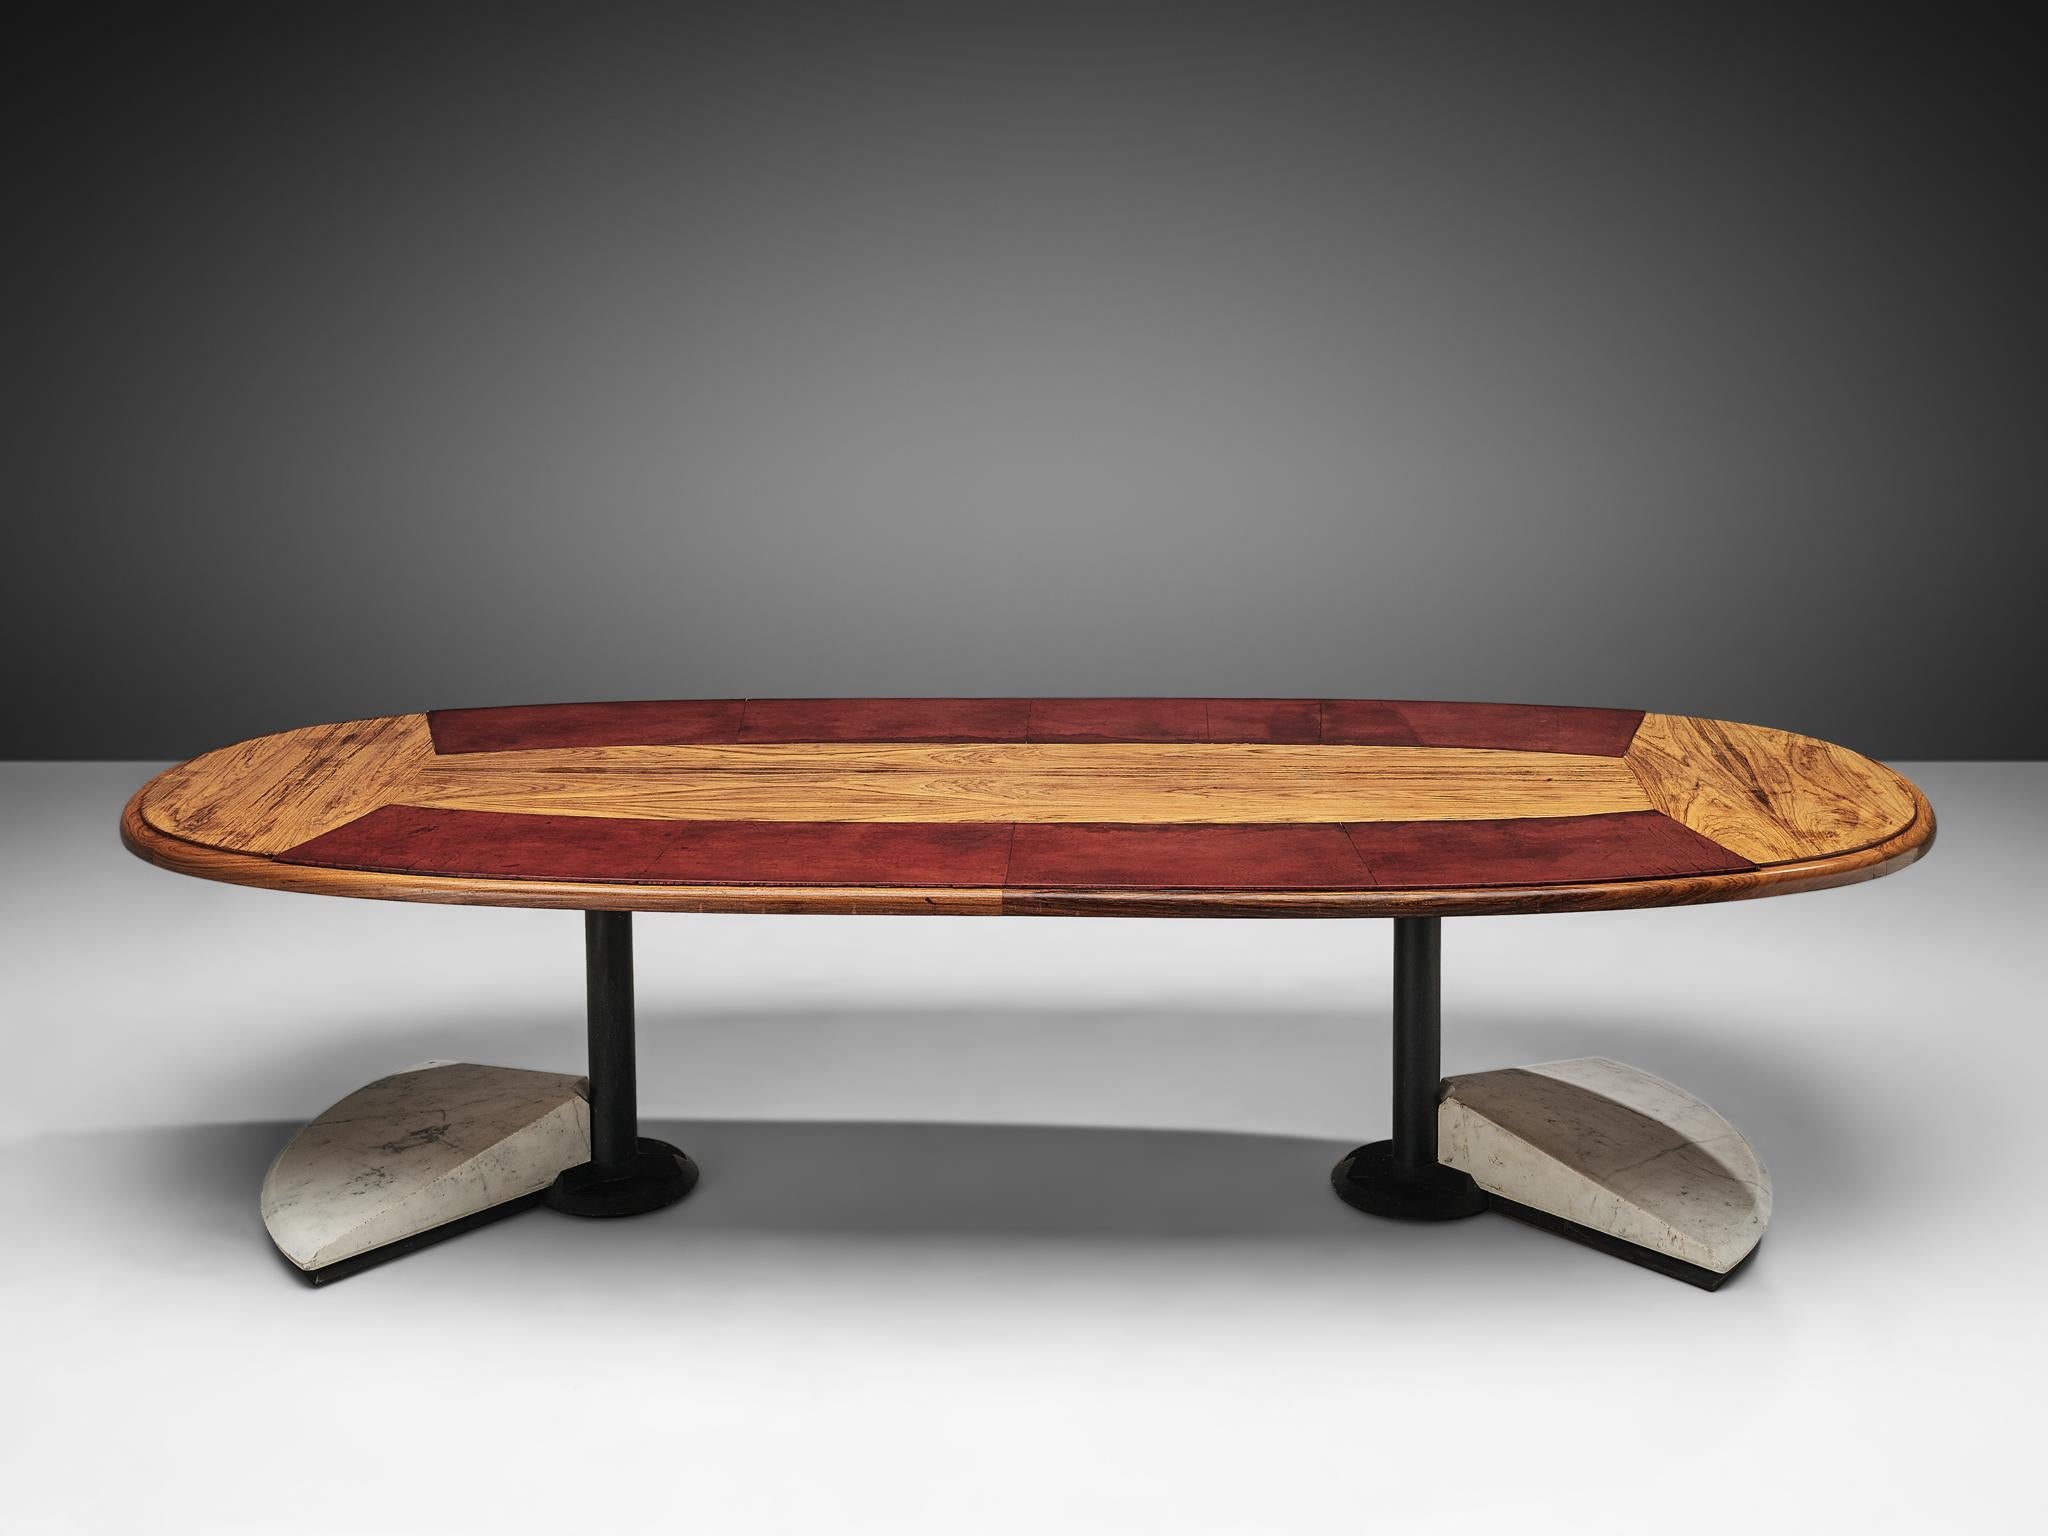 Conference Table in Walnut, Carrara Marble and Red Leather